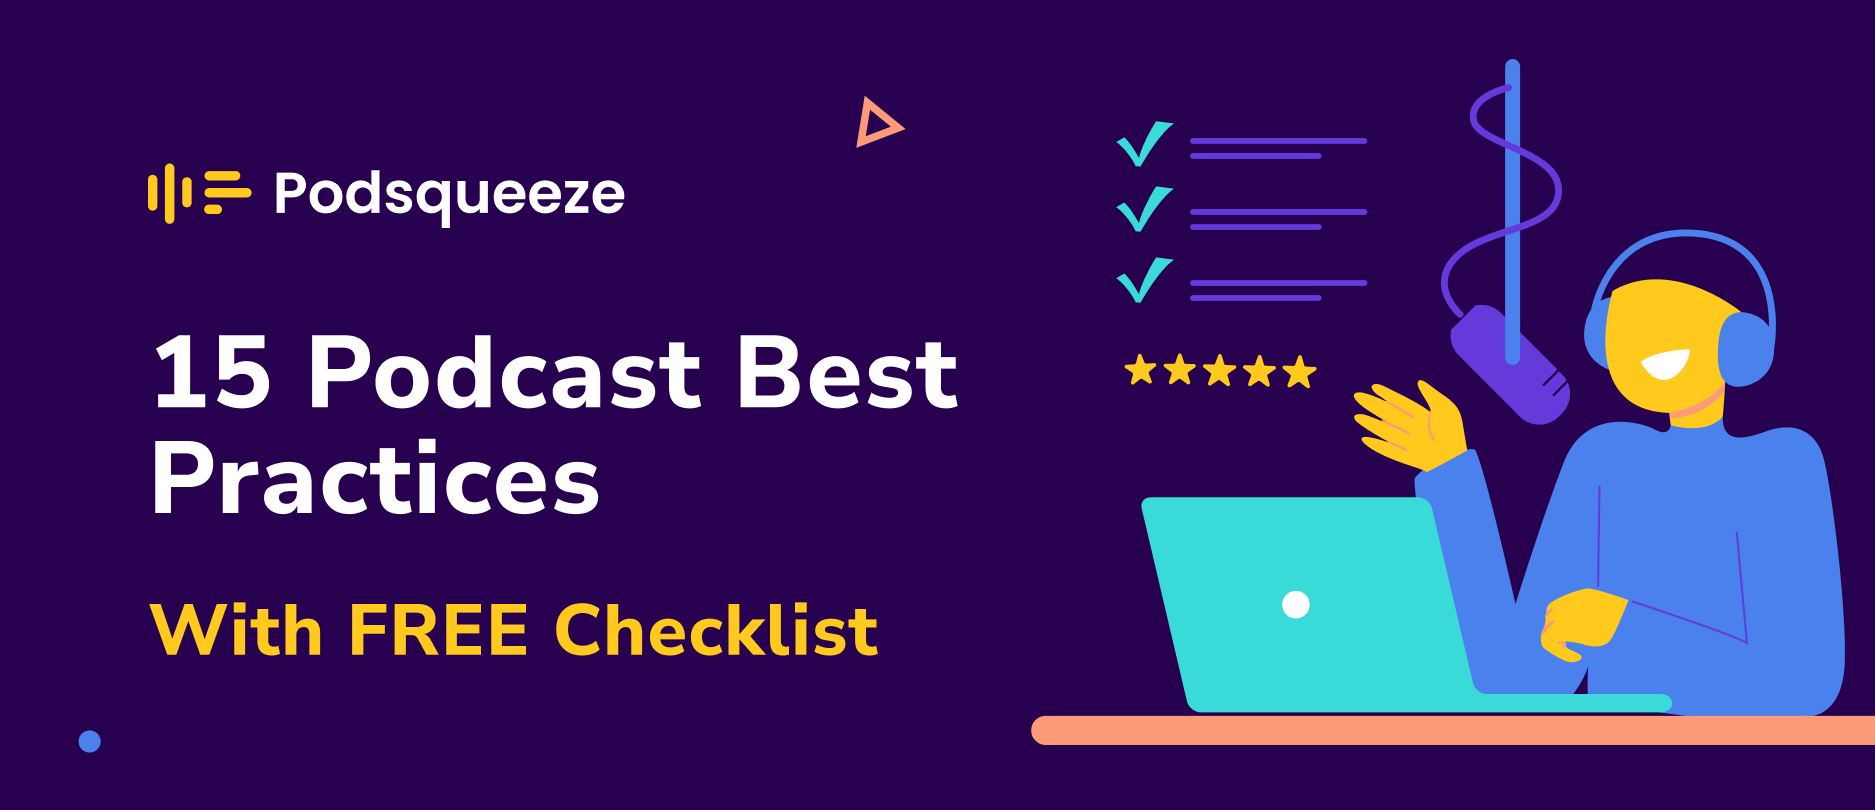 podcast-best-practices-article-cover